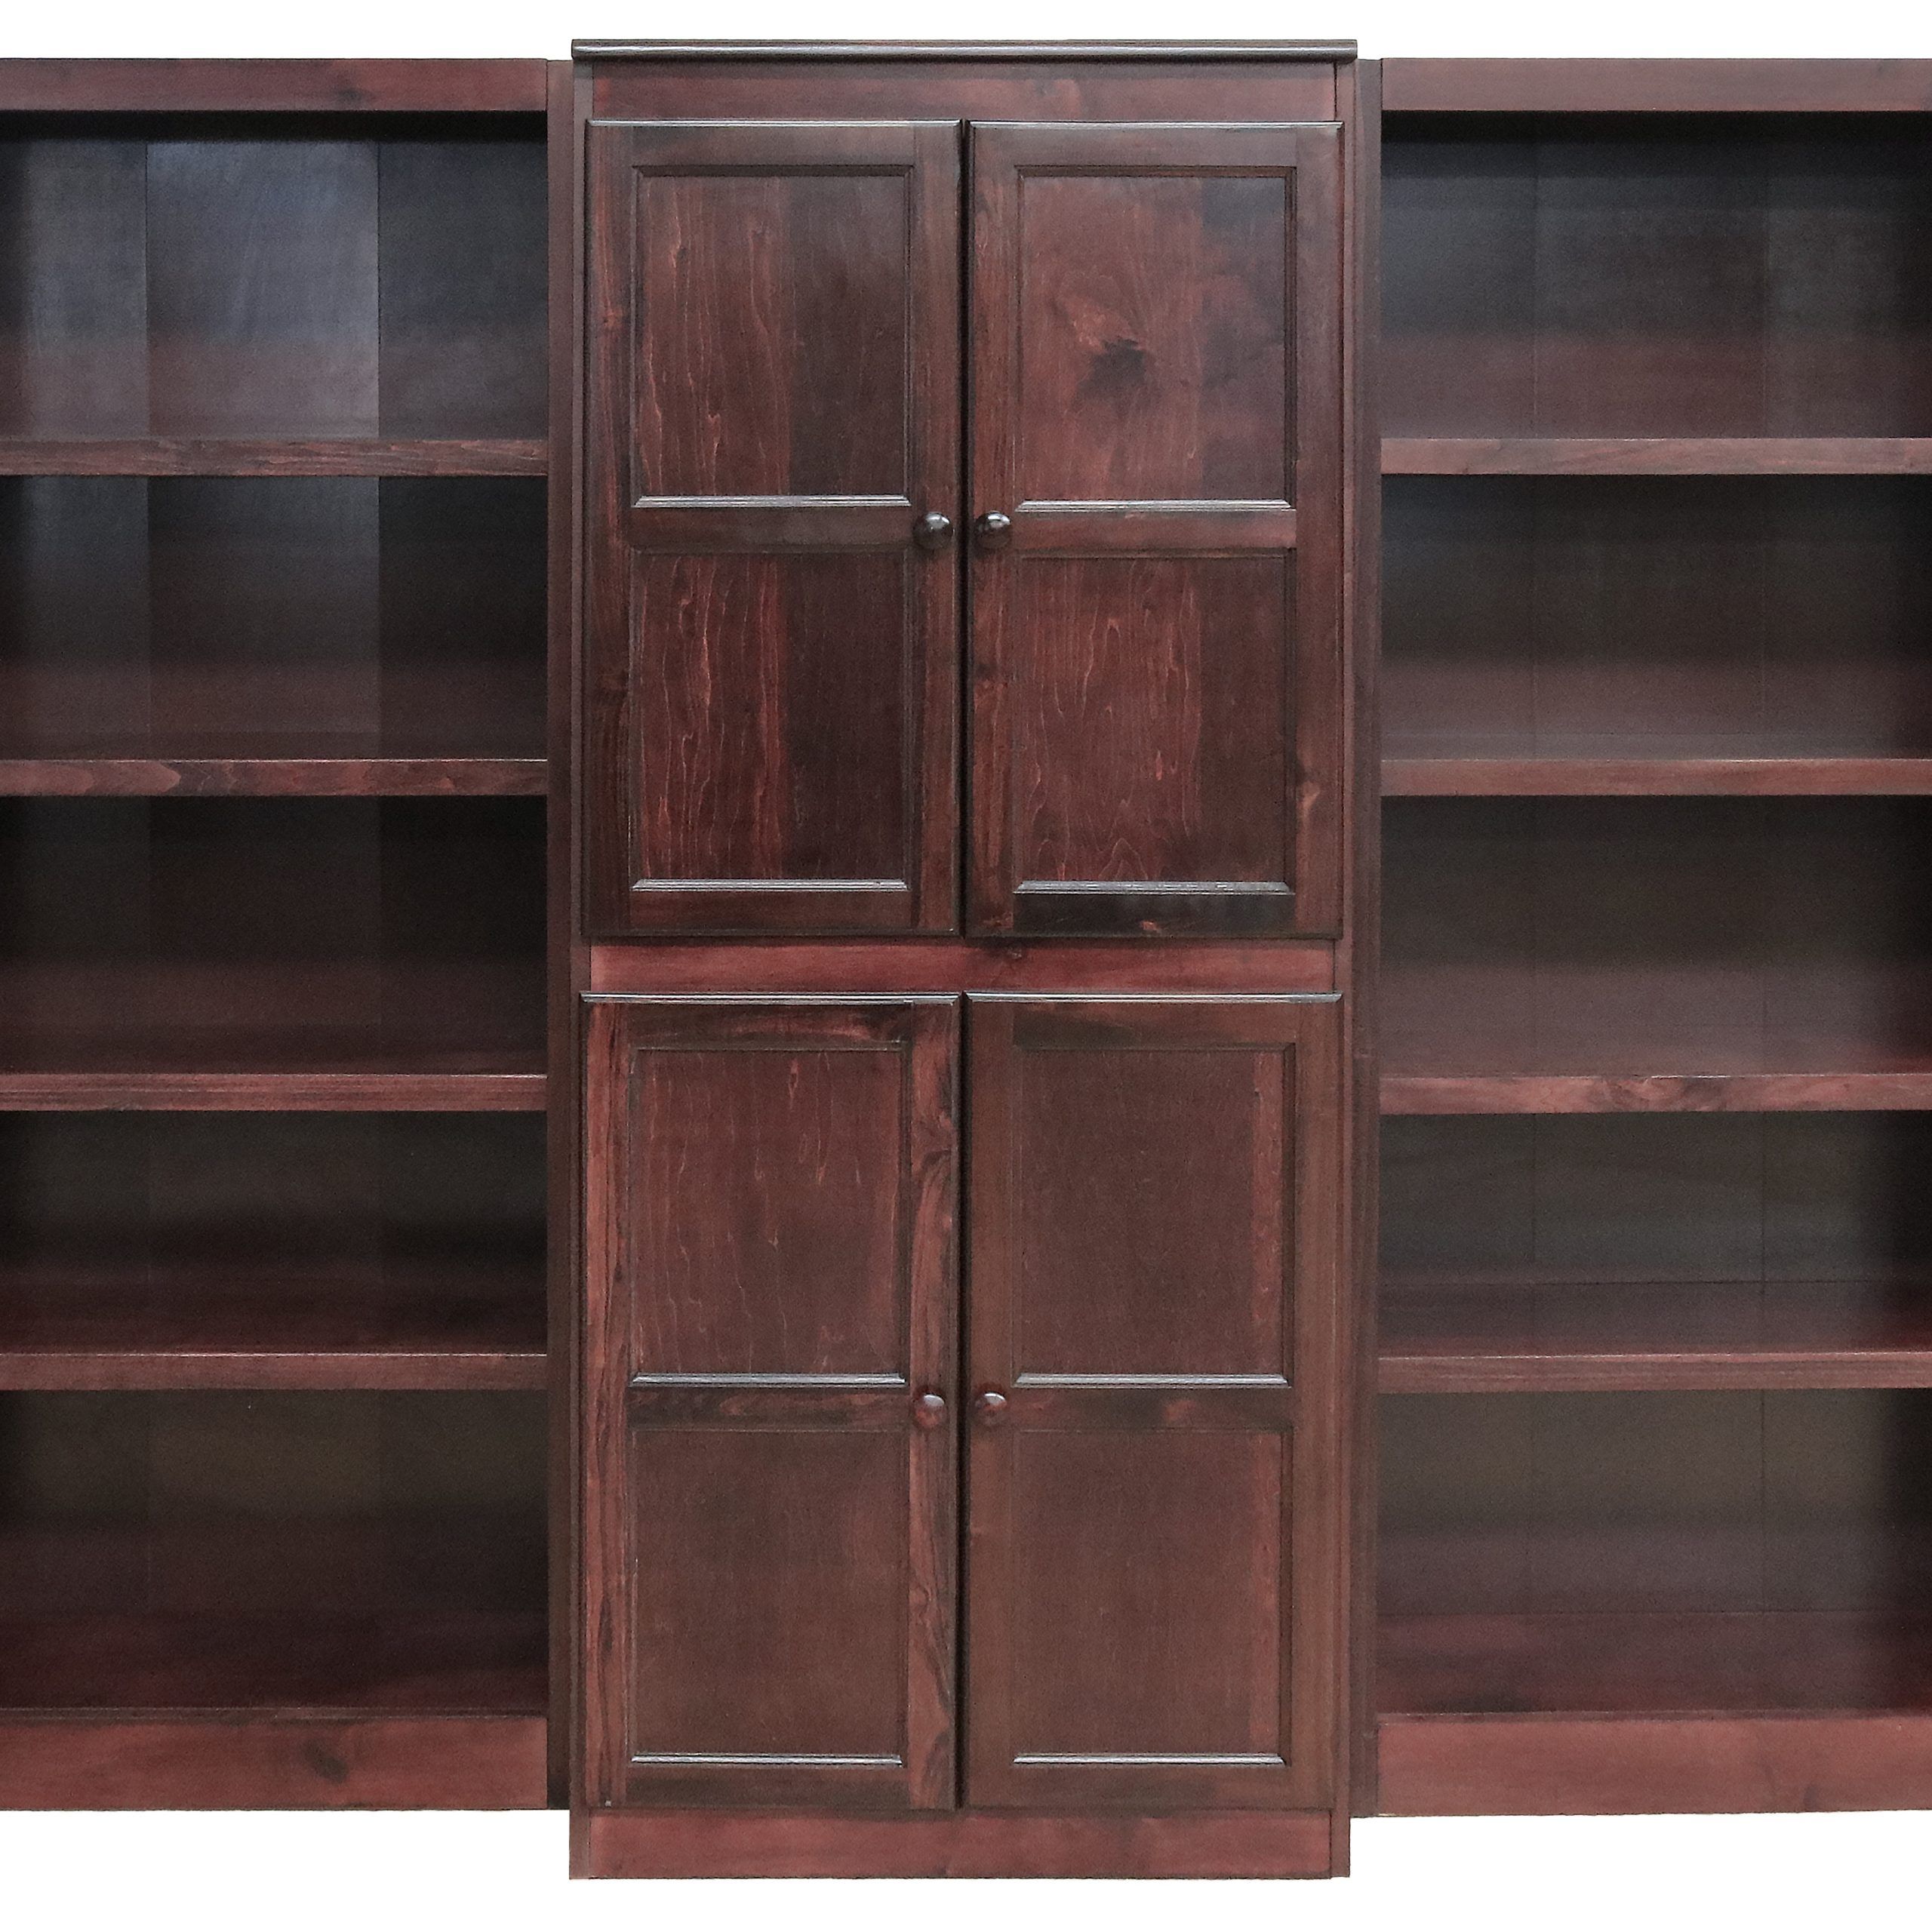 Concepts In Wood 15 Shelf Bookcase Wall With Doors, 72 Inch Tall – Cherry  Finish – Walmart With 72 Inch Bookcases With Cabinet (View 12 of 15)